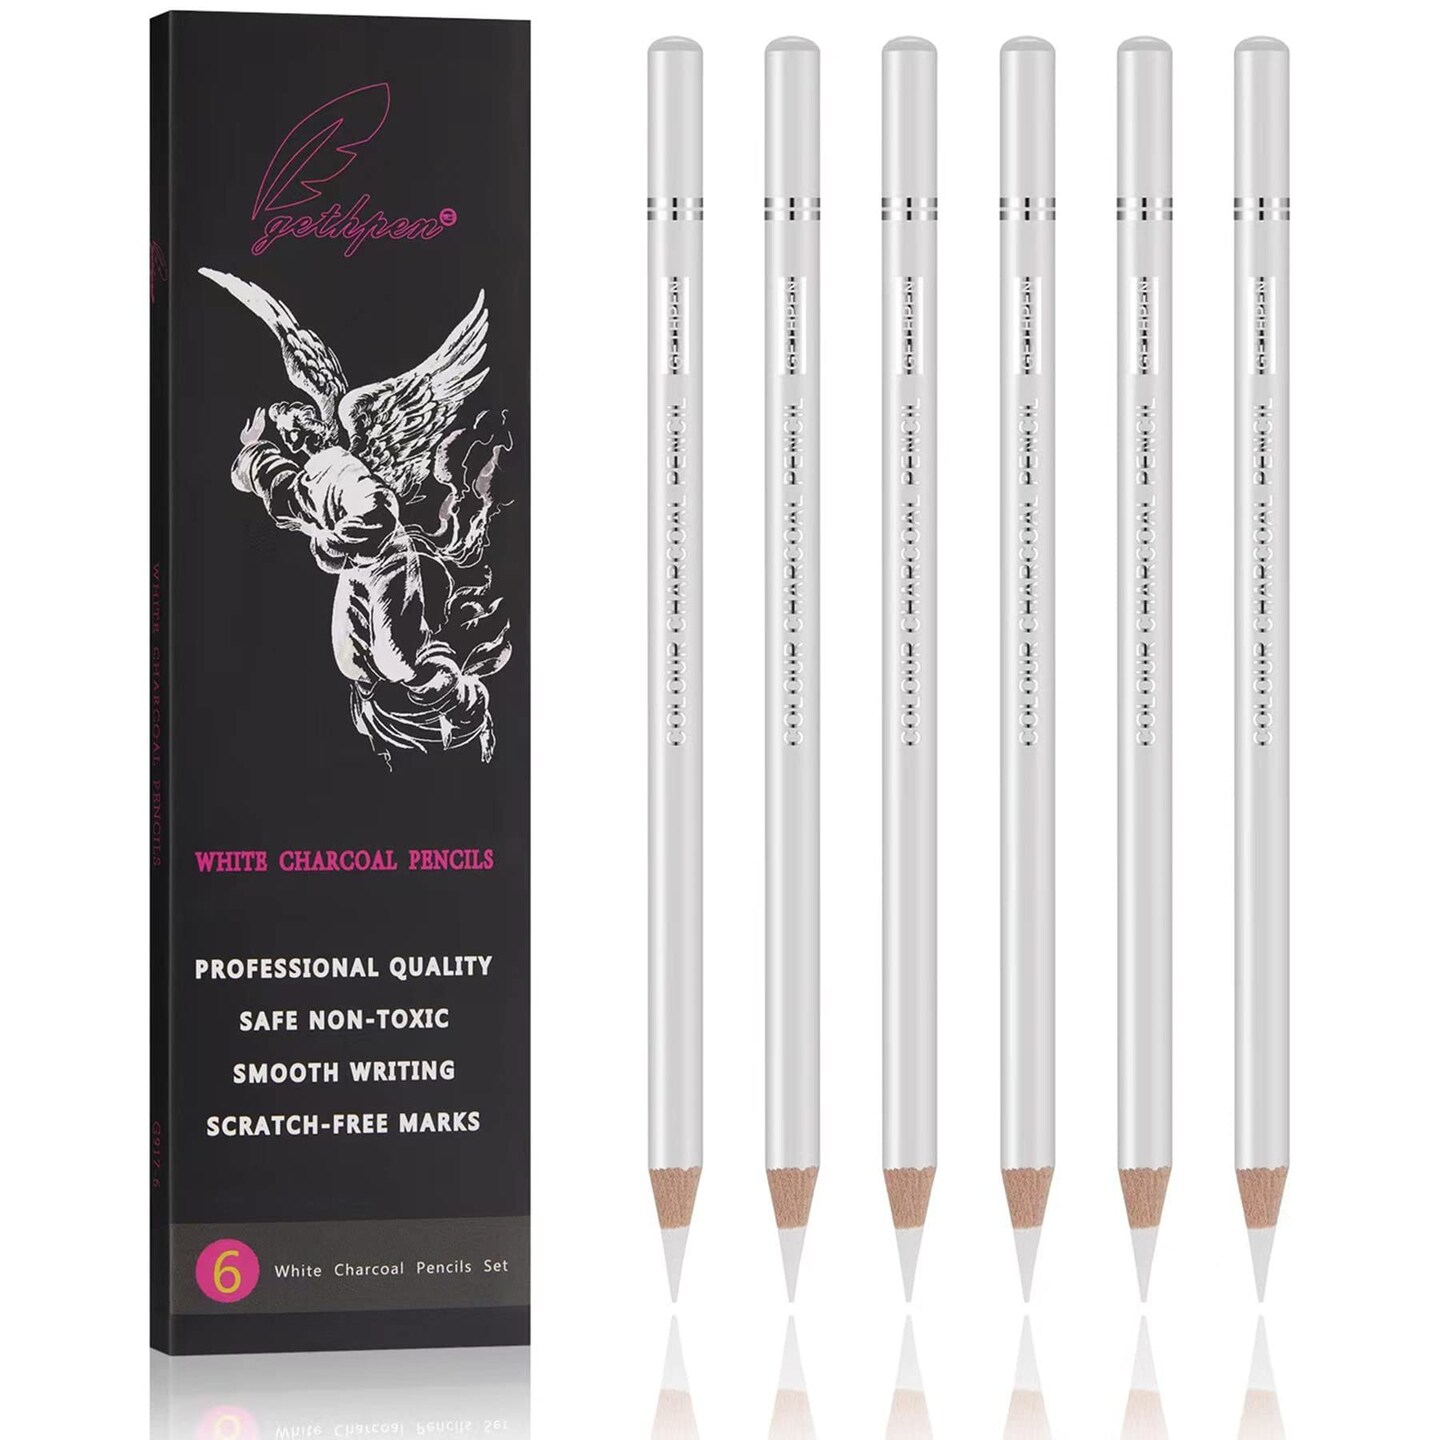 GETHPEN Professional White Charcoal Pencils Set - 6 Pieces Sketch Highlight White Pencils for Drawing, Sketching, Shading, Blending, White Chalk Pencils for Beginners &#x26; Artists